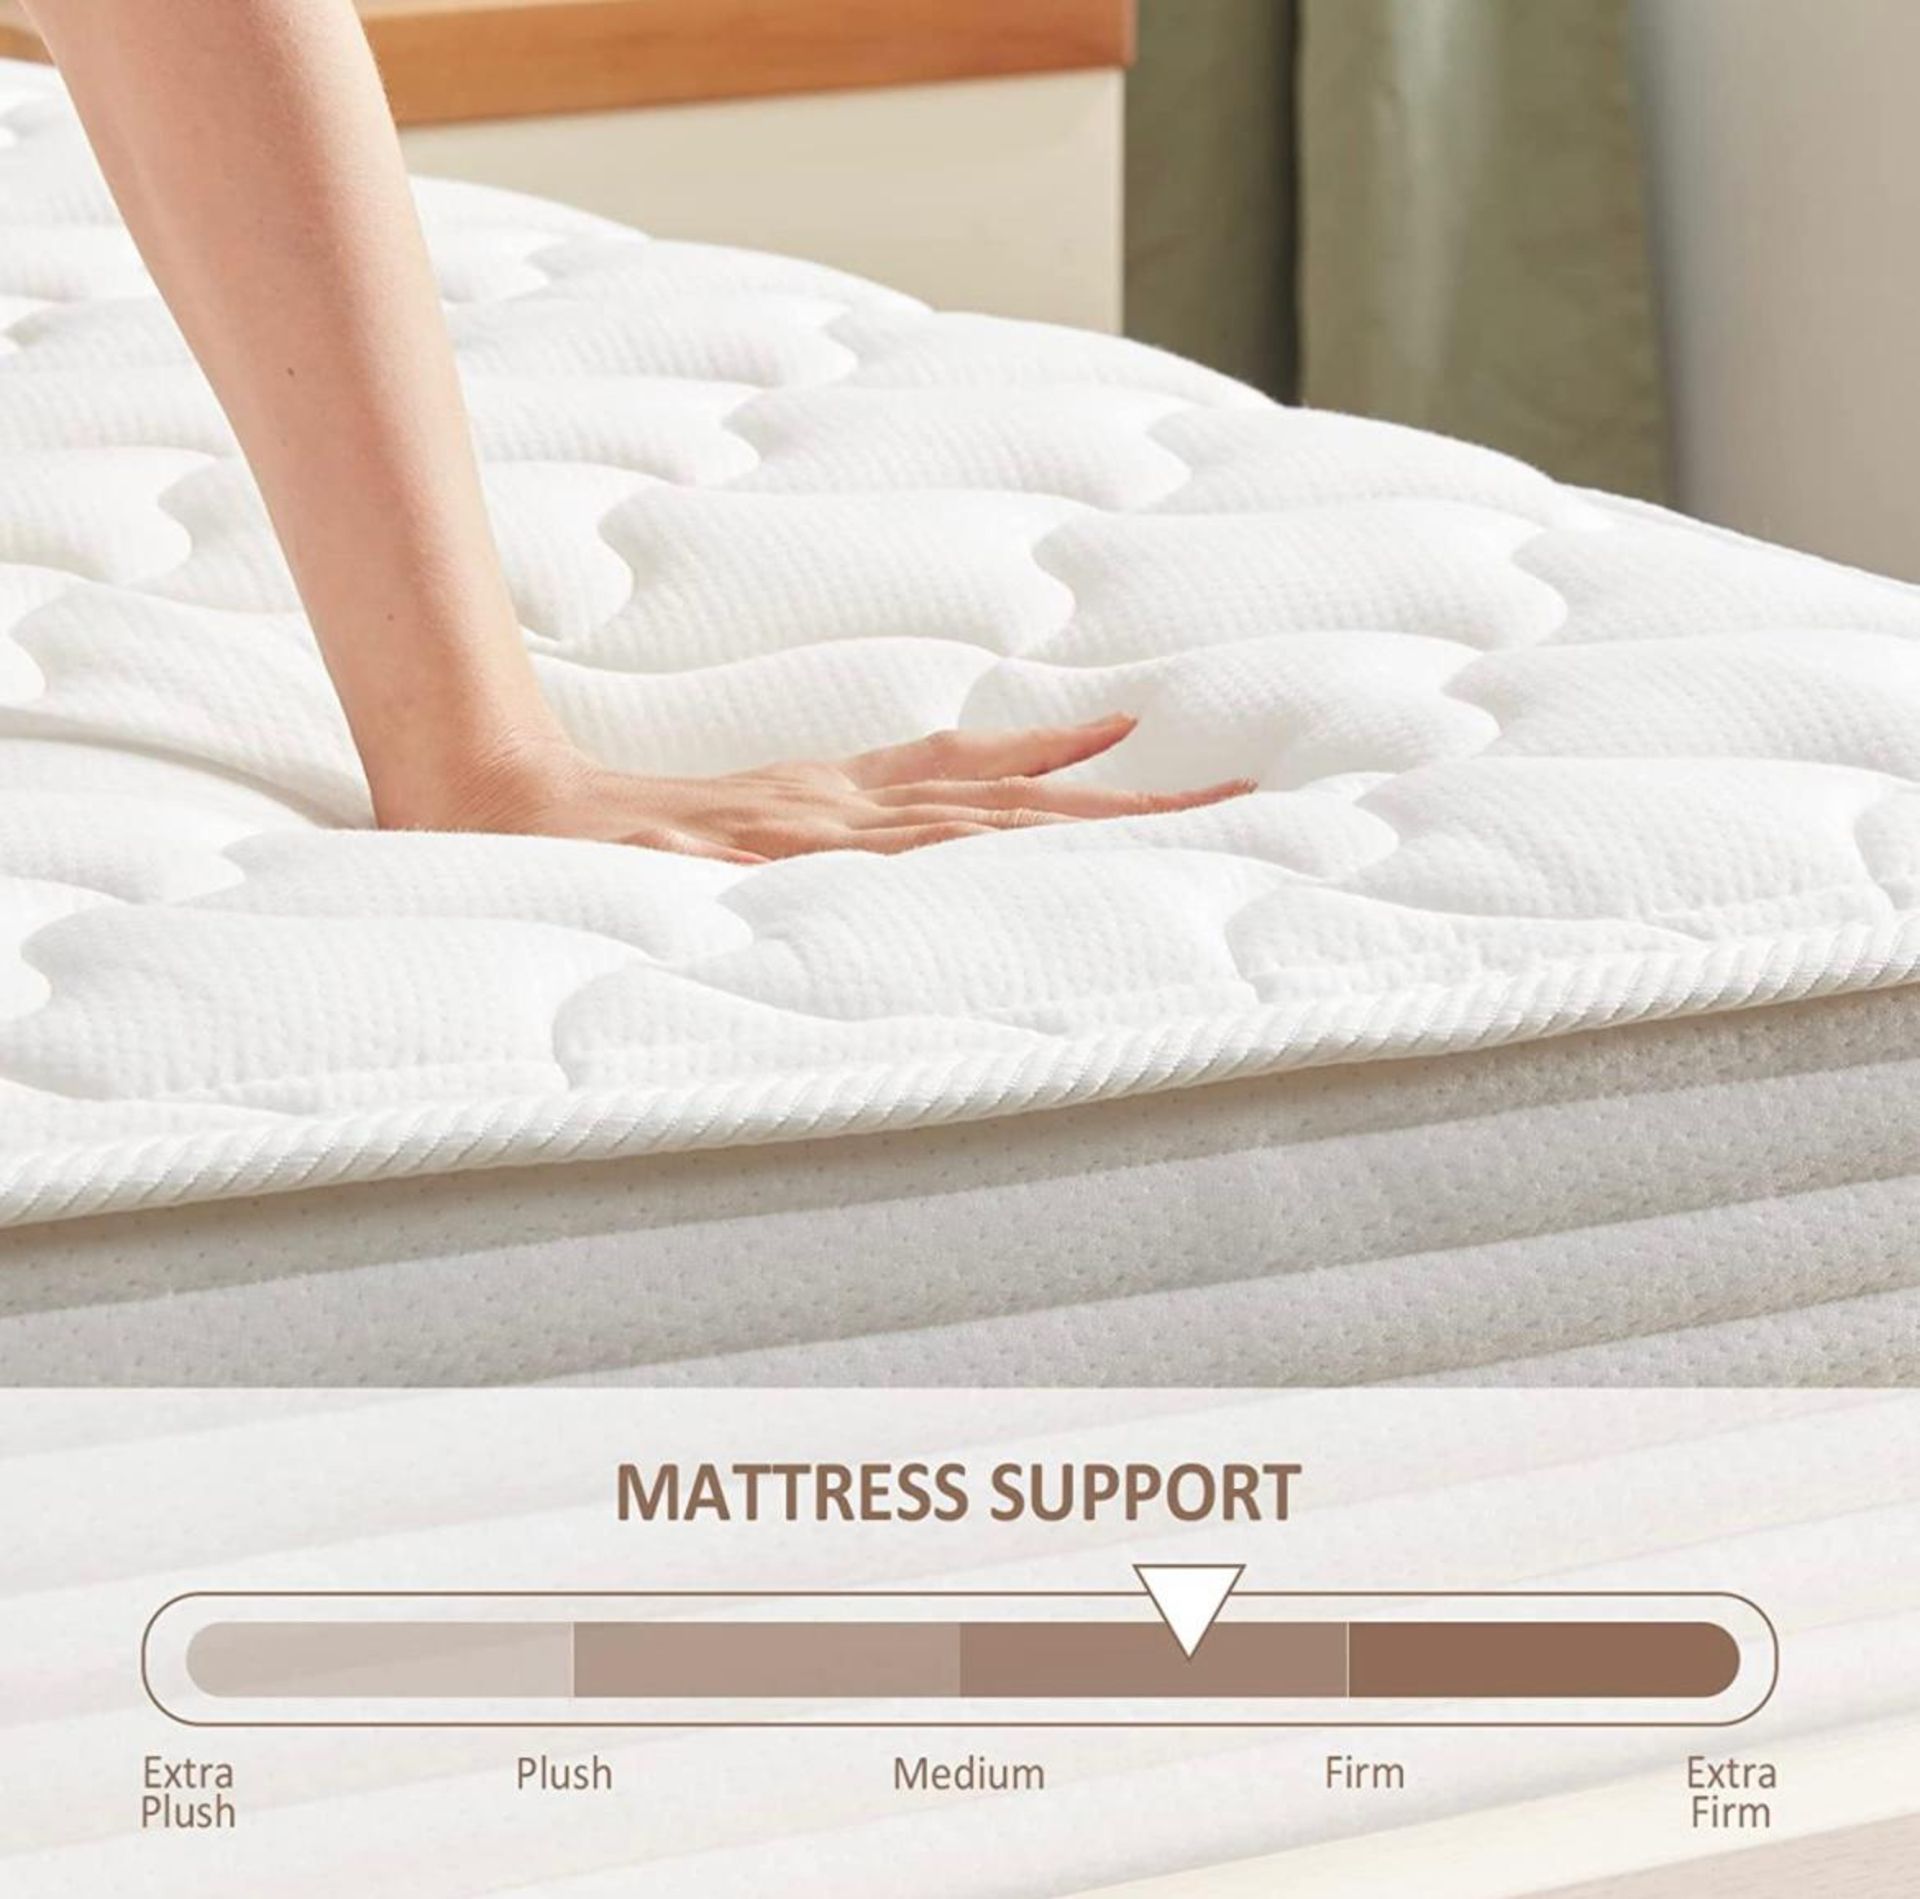 NEW 3FT SINGLE ROLLED MEMORY FOAM HYBRID MATTRESS - MAINLAND UK DELIVERY AVAILABLE FOR £20. - Image 2 of 3